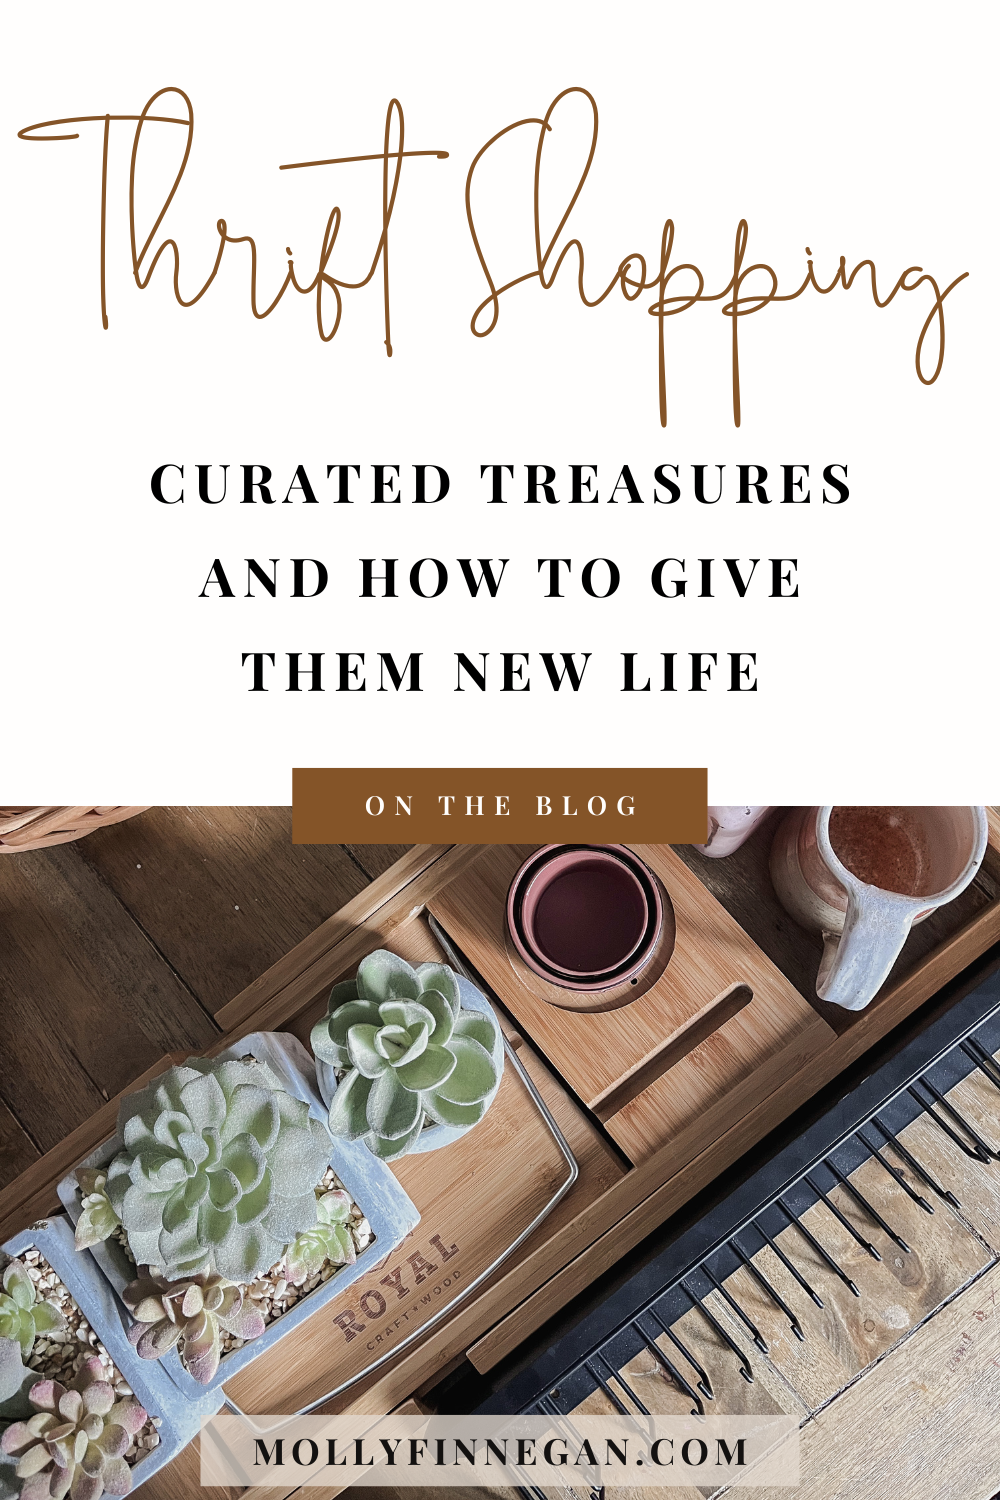 Thrift Shopping: Curated Treasures and How to Give them New Life graphic